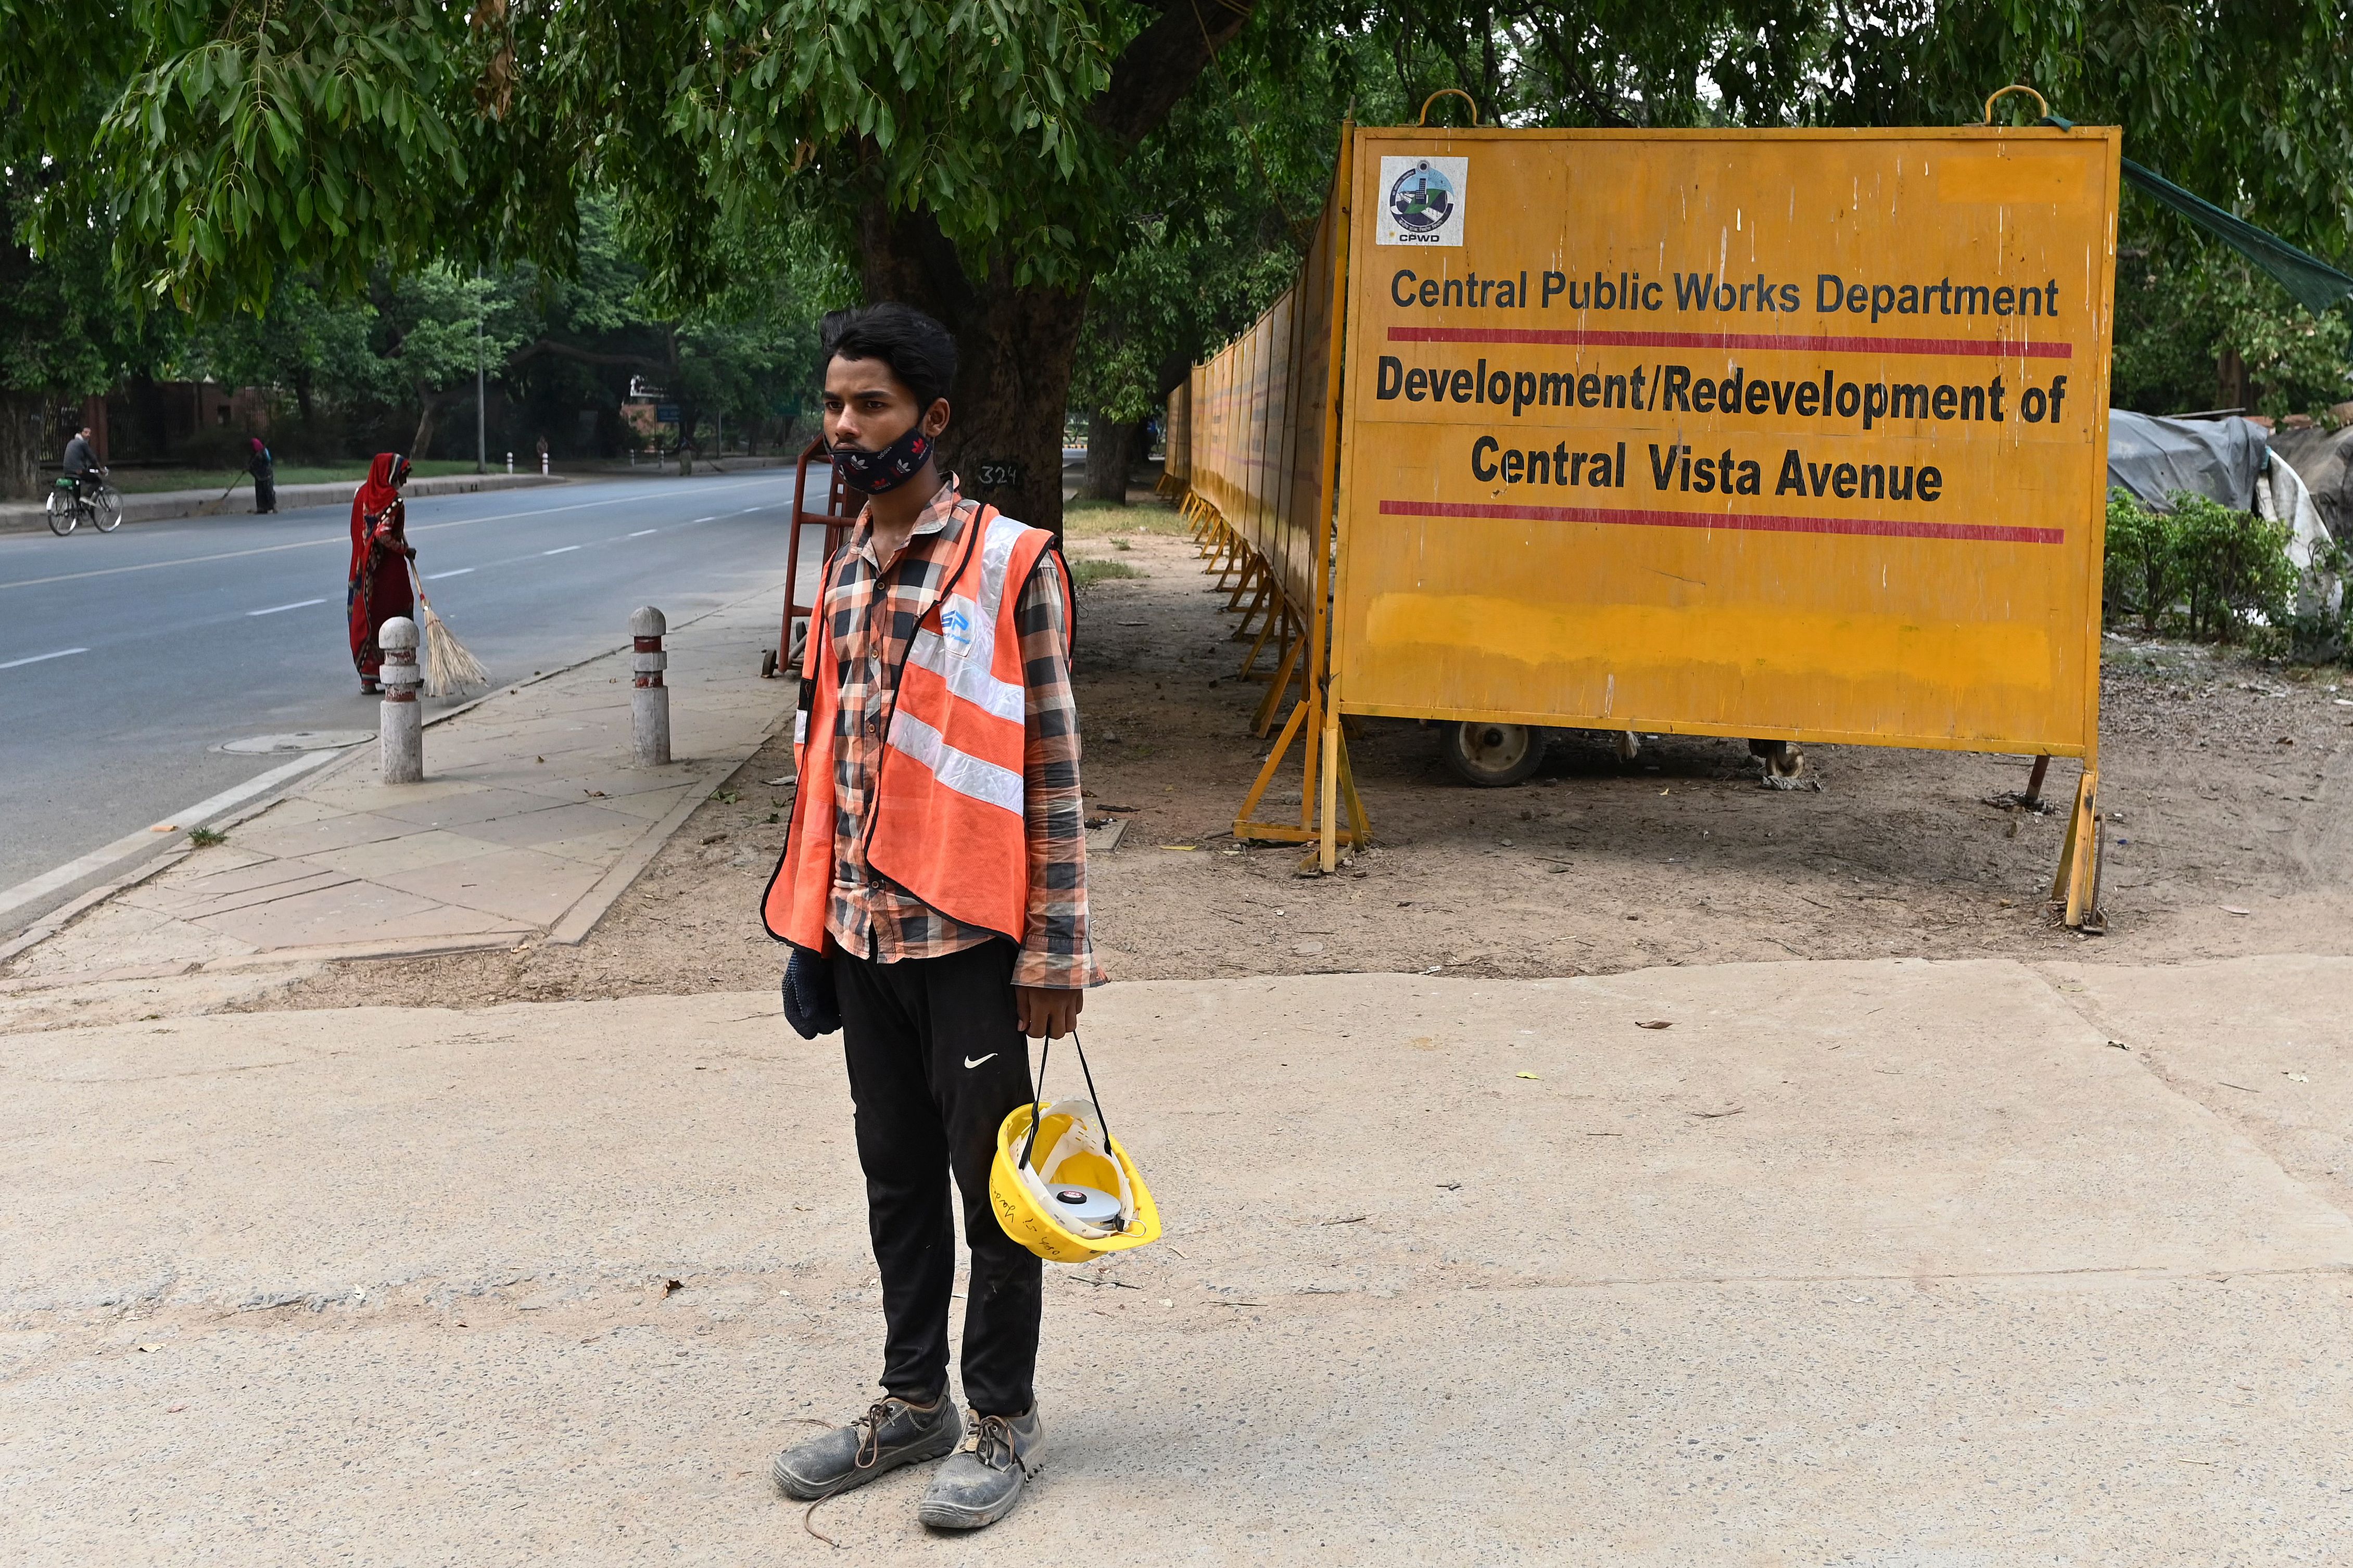 A worker stands at the site of a redevelopment work of the Central Vista Avenue by Central Public Works Department, along the Rajpath road in New Delhi